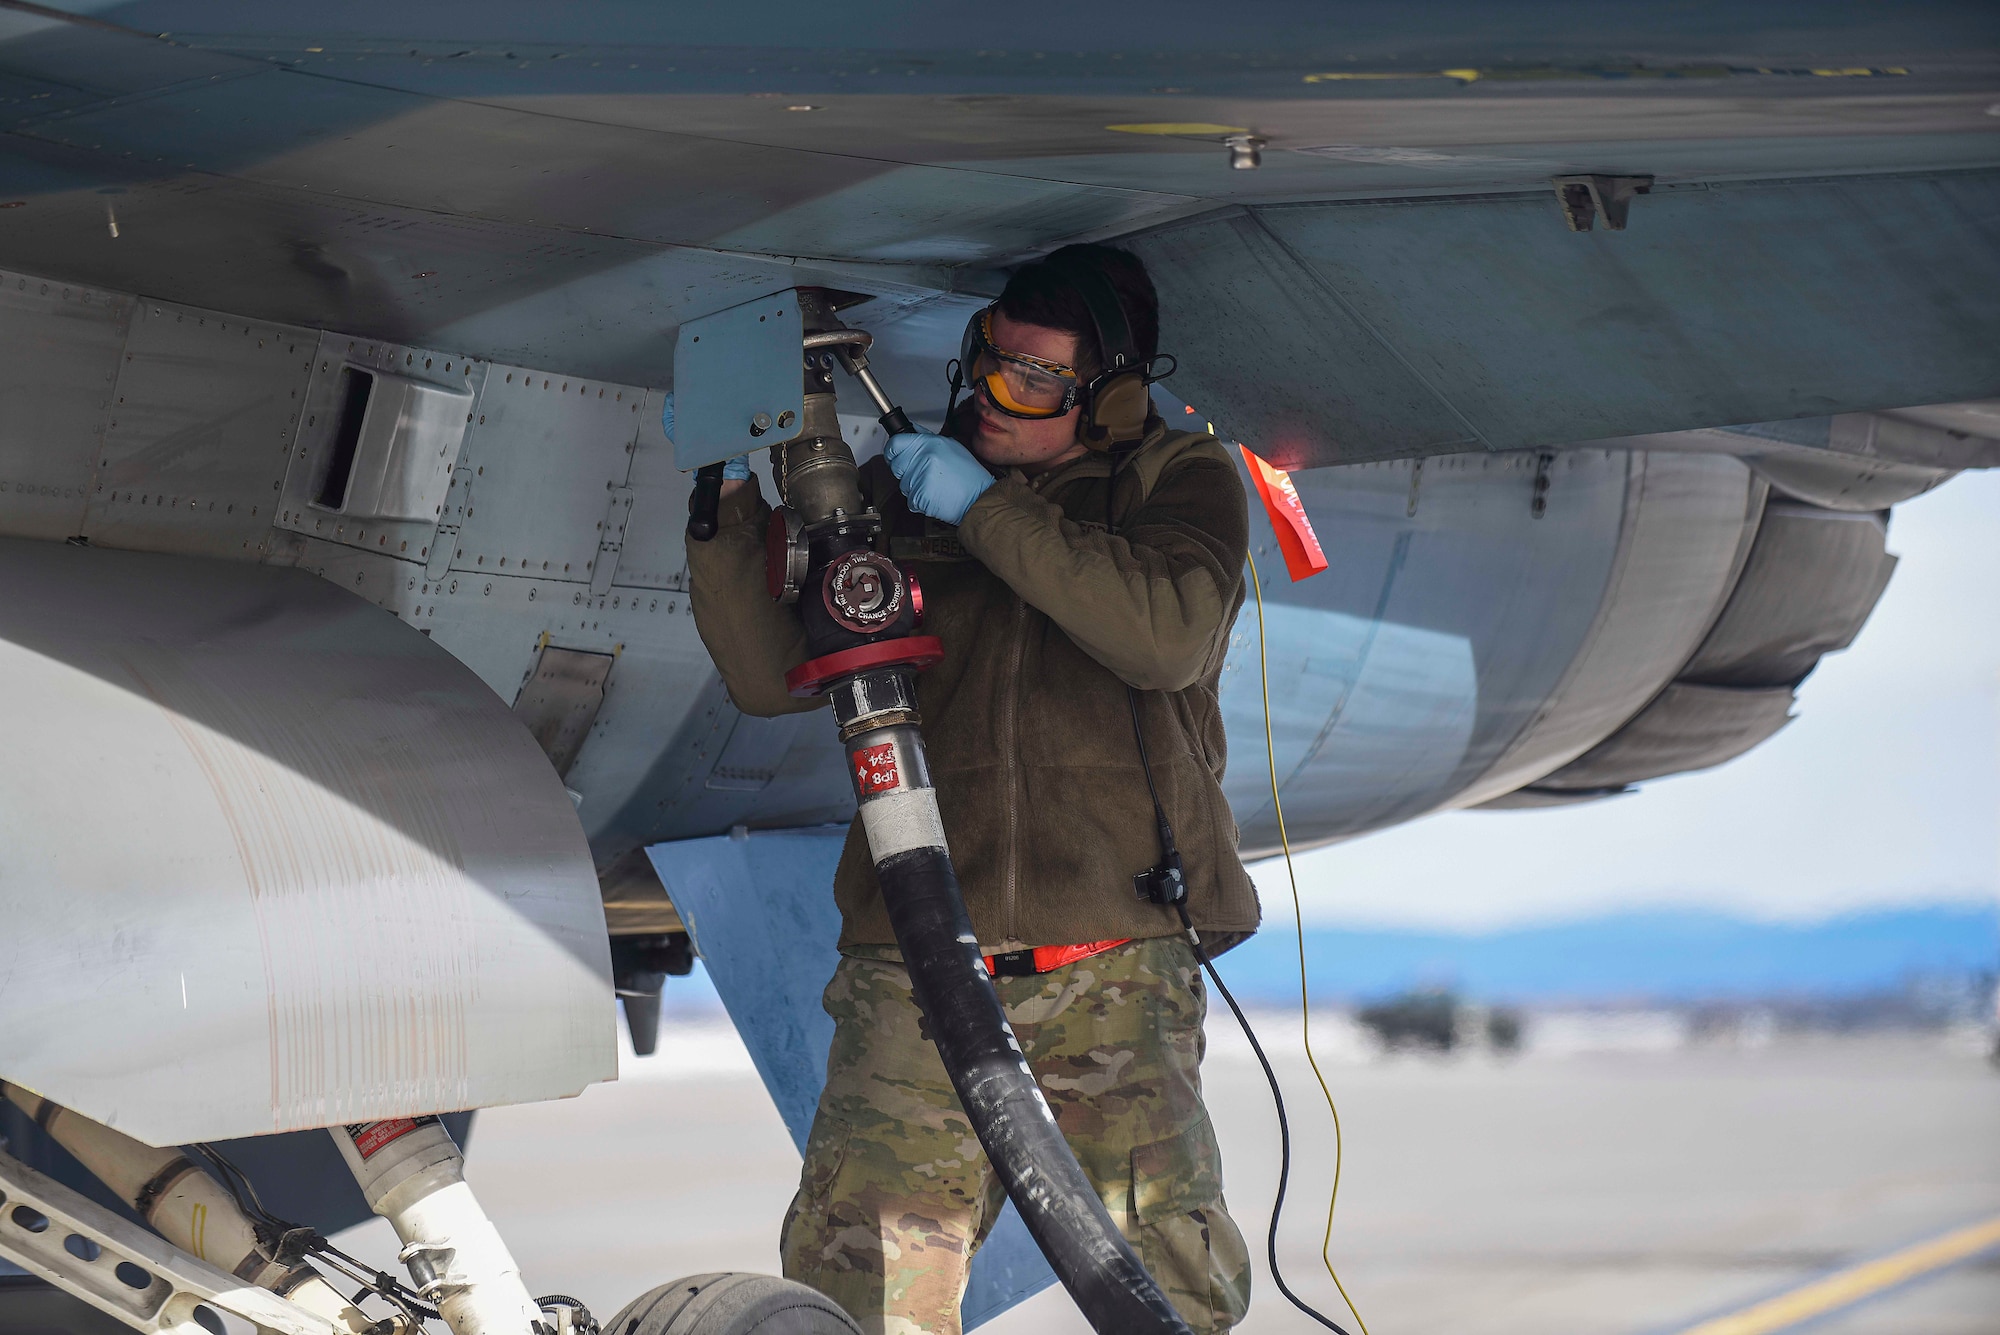 Senior Airman Shane Weber, 18th Aggressors Squadron avionics technician, refuels an F-16 Fighting Falcon, April 13, 2021, on Eielson Air Force Base, Alaska. Airmen trained during Arctic Gold 21-2 to accomplish multiple duties on the flightline, making our force more flexible during rapid deployment operations. (U.S. Air Force photo by Senior Airman Keith Holcomb)